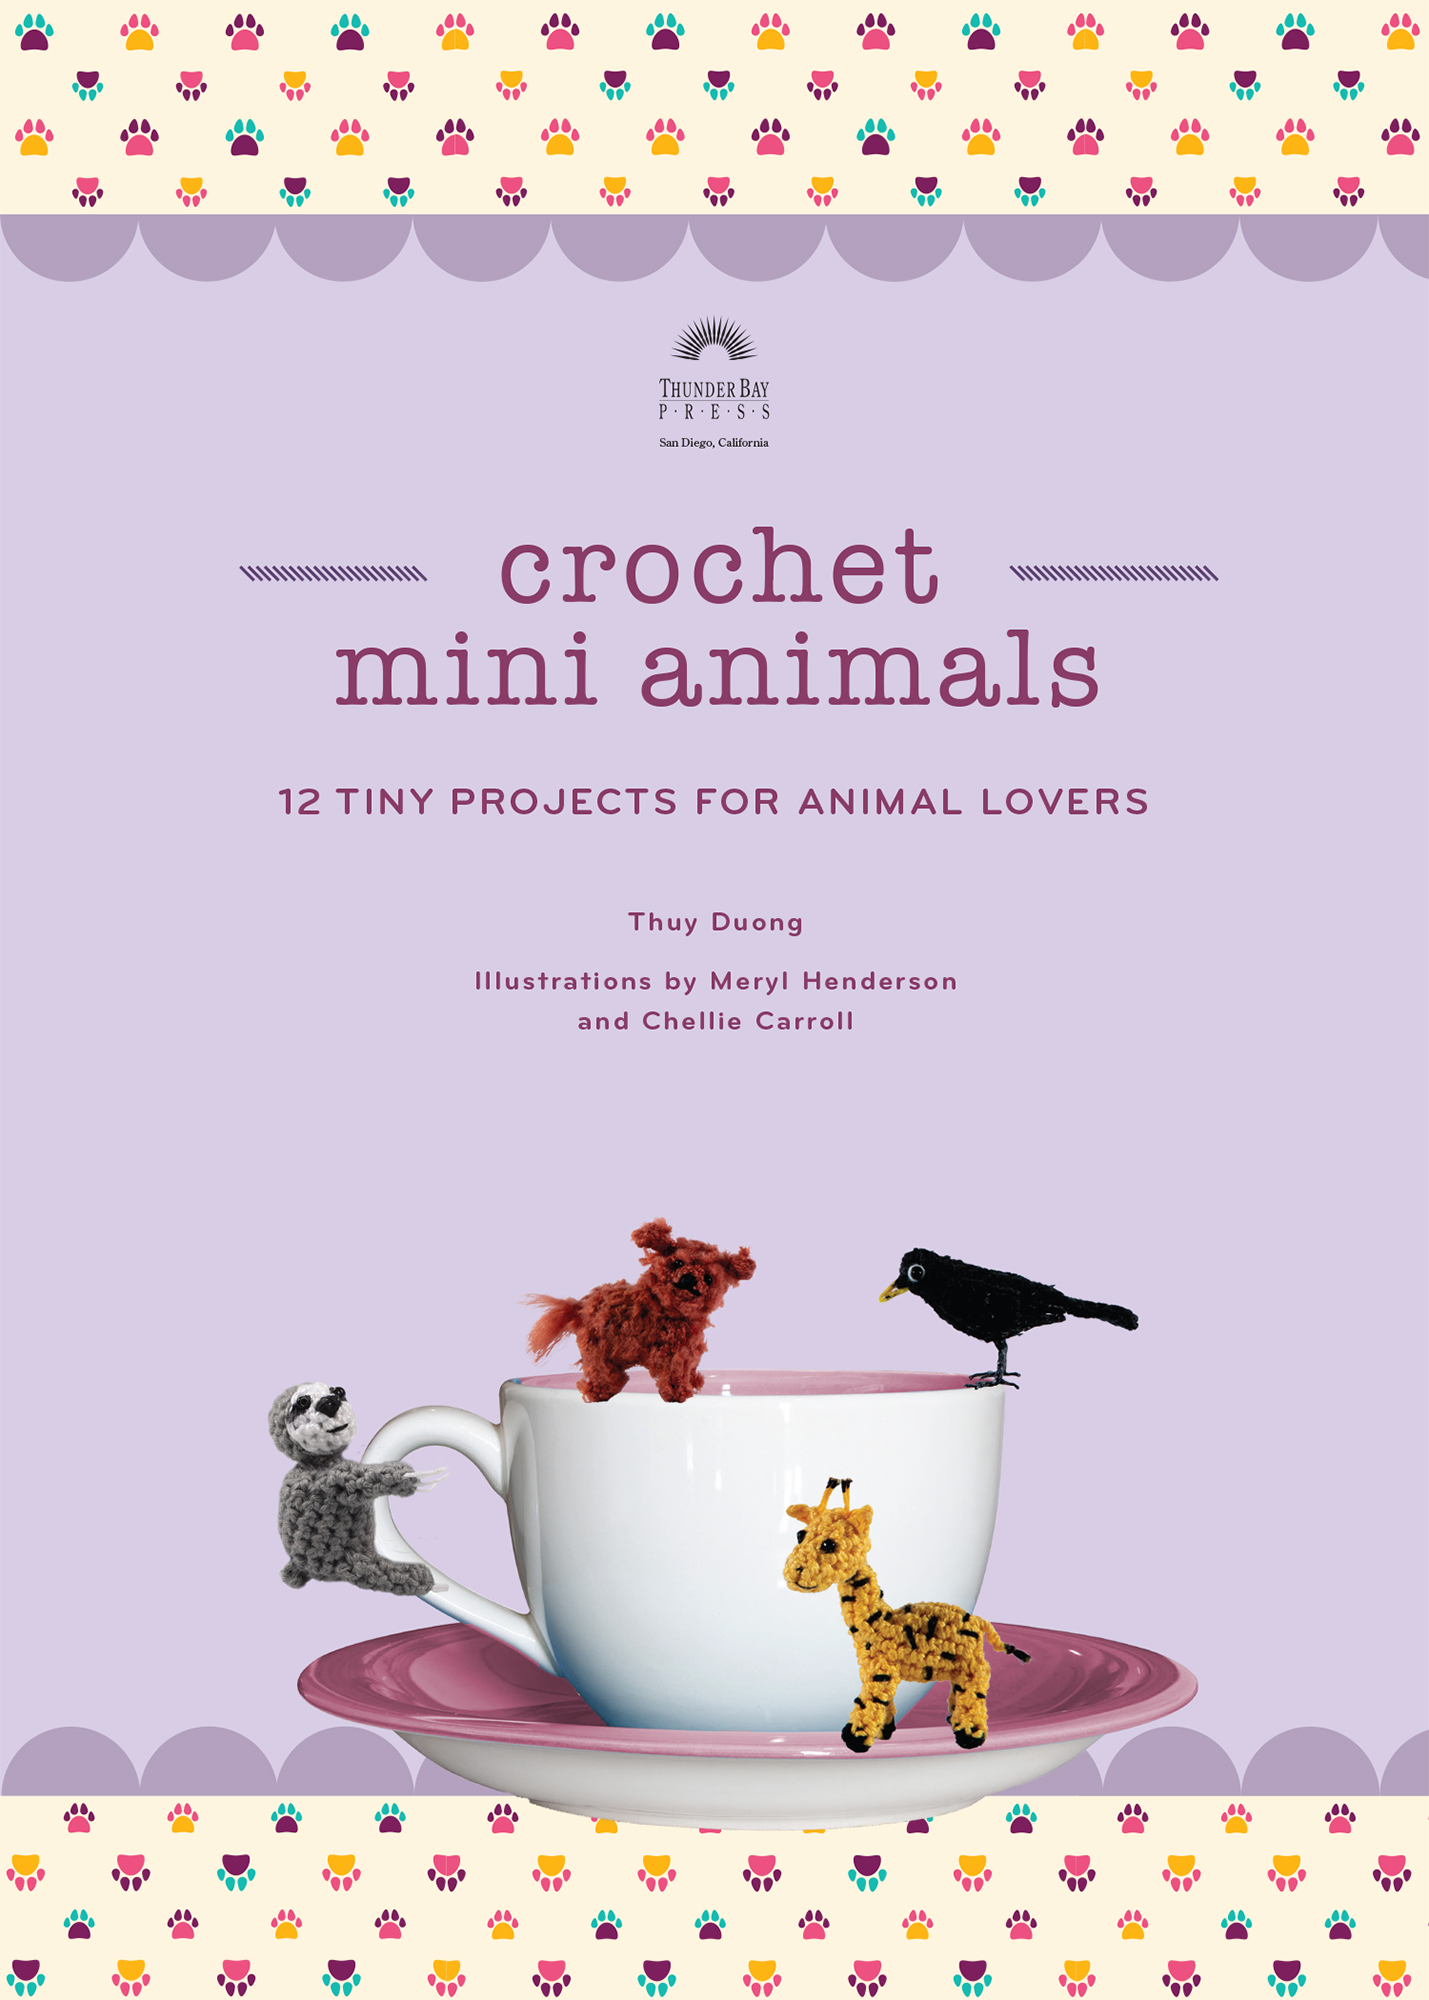 Crochet Mini Animals 12 Tiny Projects for Animal Lovers - image 2